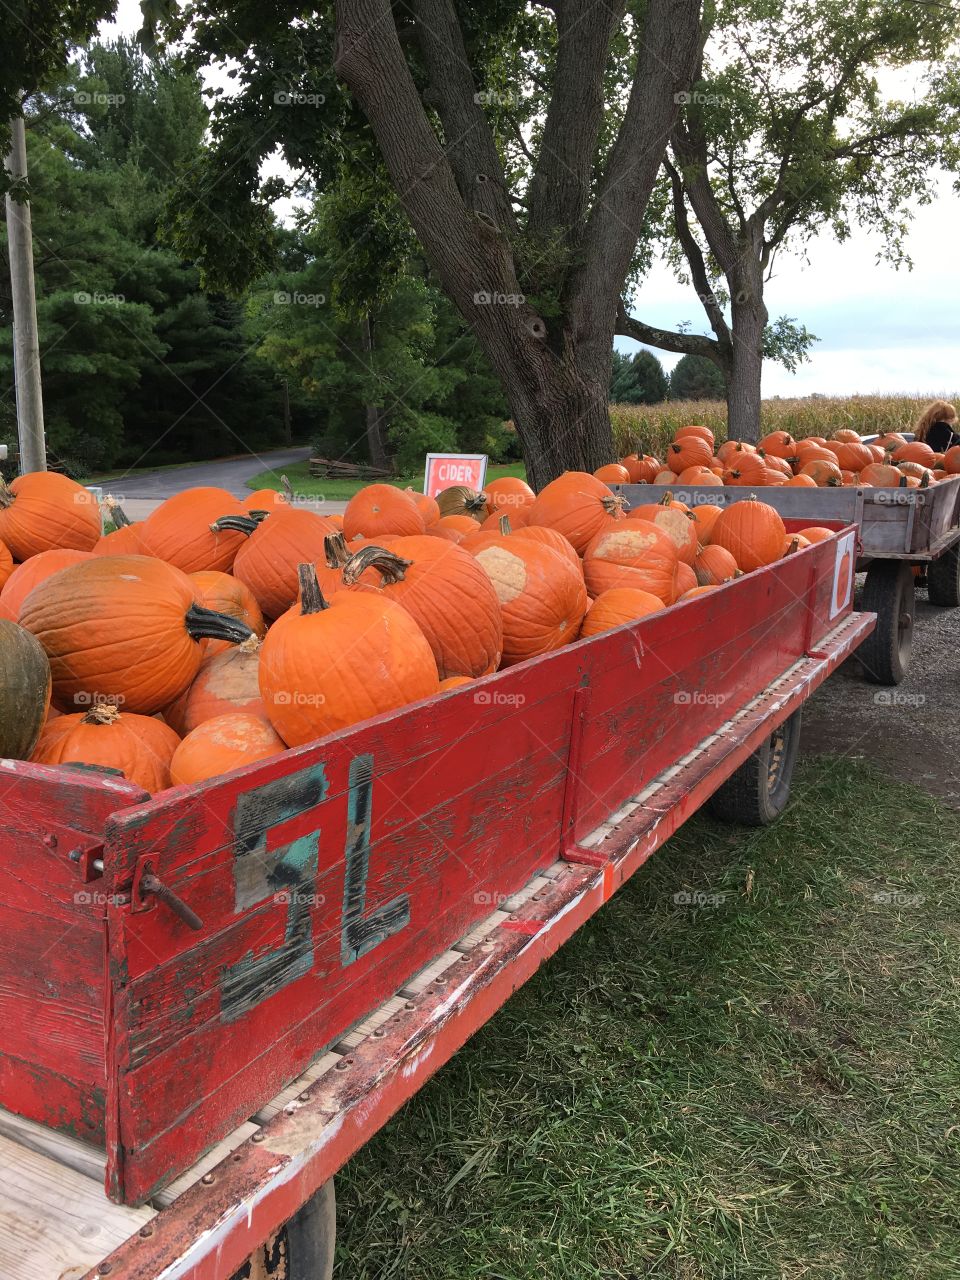 Pumpkins in a wagon in Ohio during October 